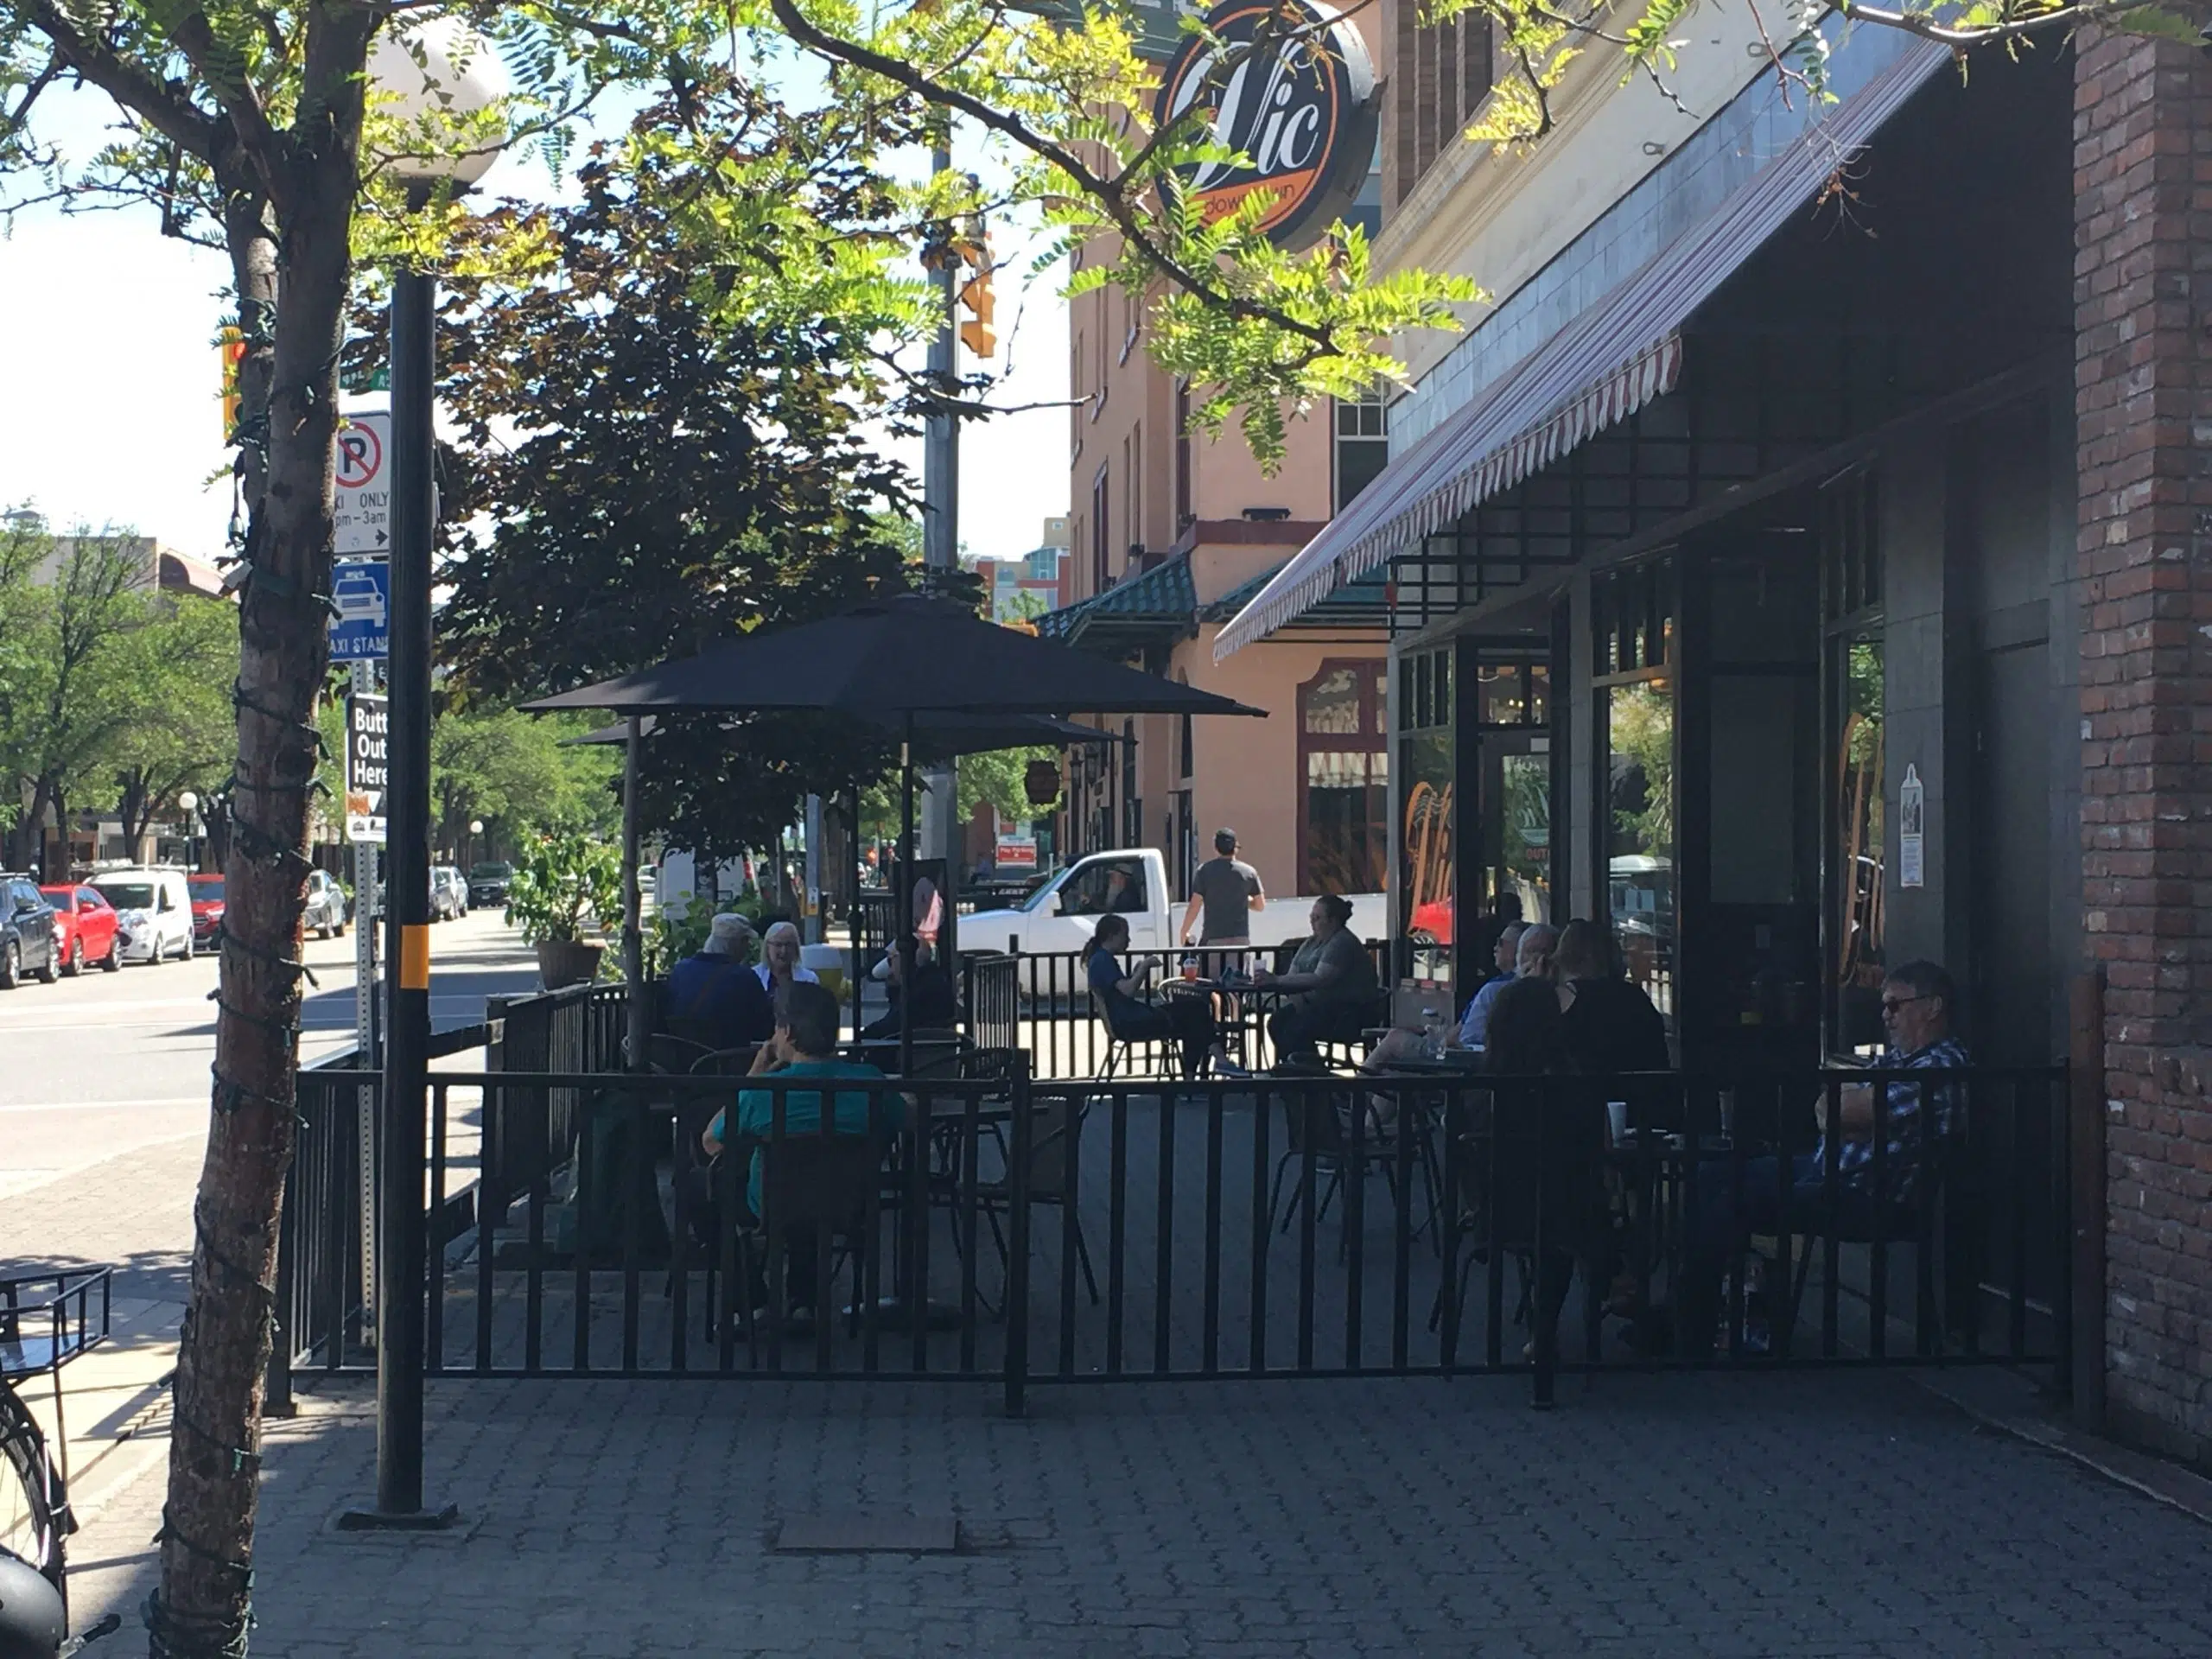 KCBIA says not much interest yet in continuing expanded patio policy beyond Oct. 31